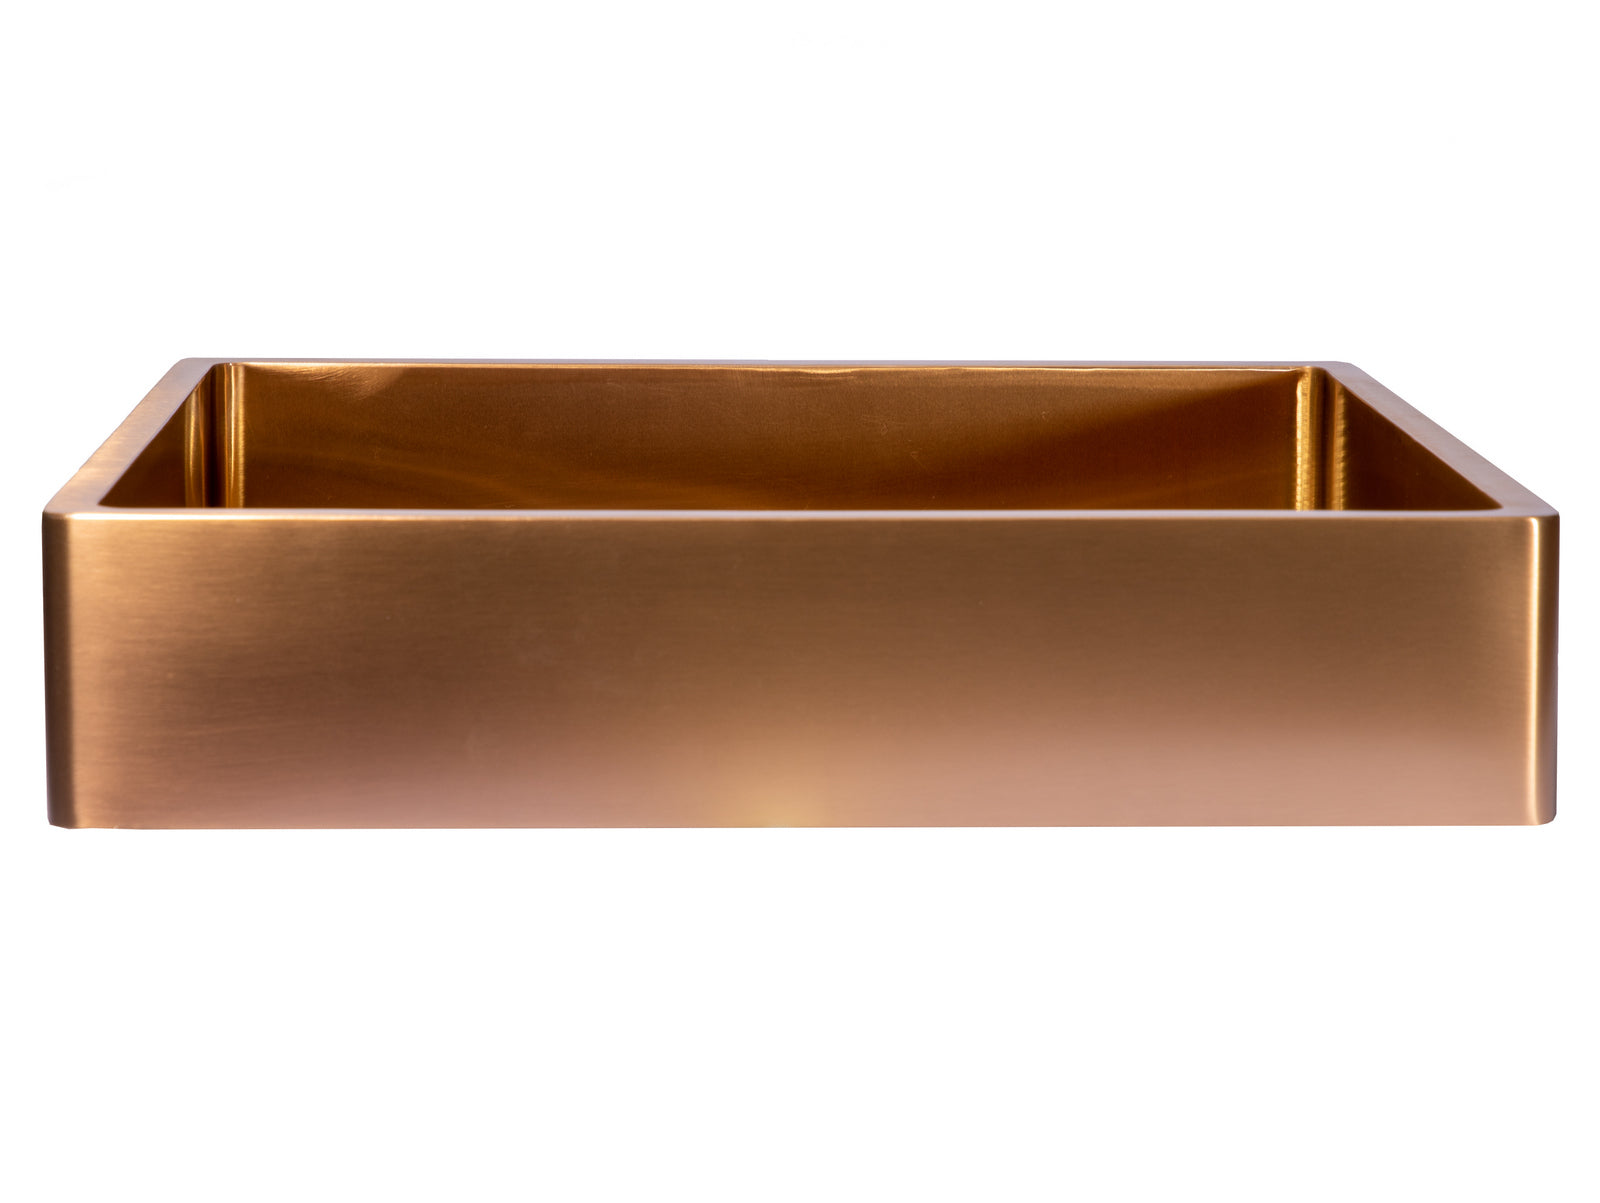 Rectangular 18 3/4" x 15 3/4" Thick Rim Stainless Steel Bathroom Vessel Sink with Drain in Rose Gold